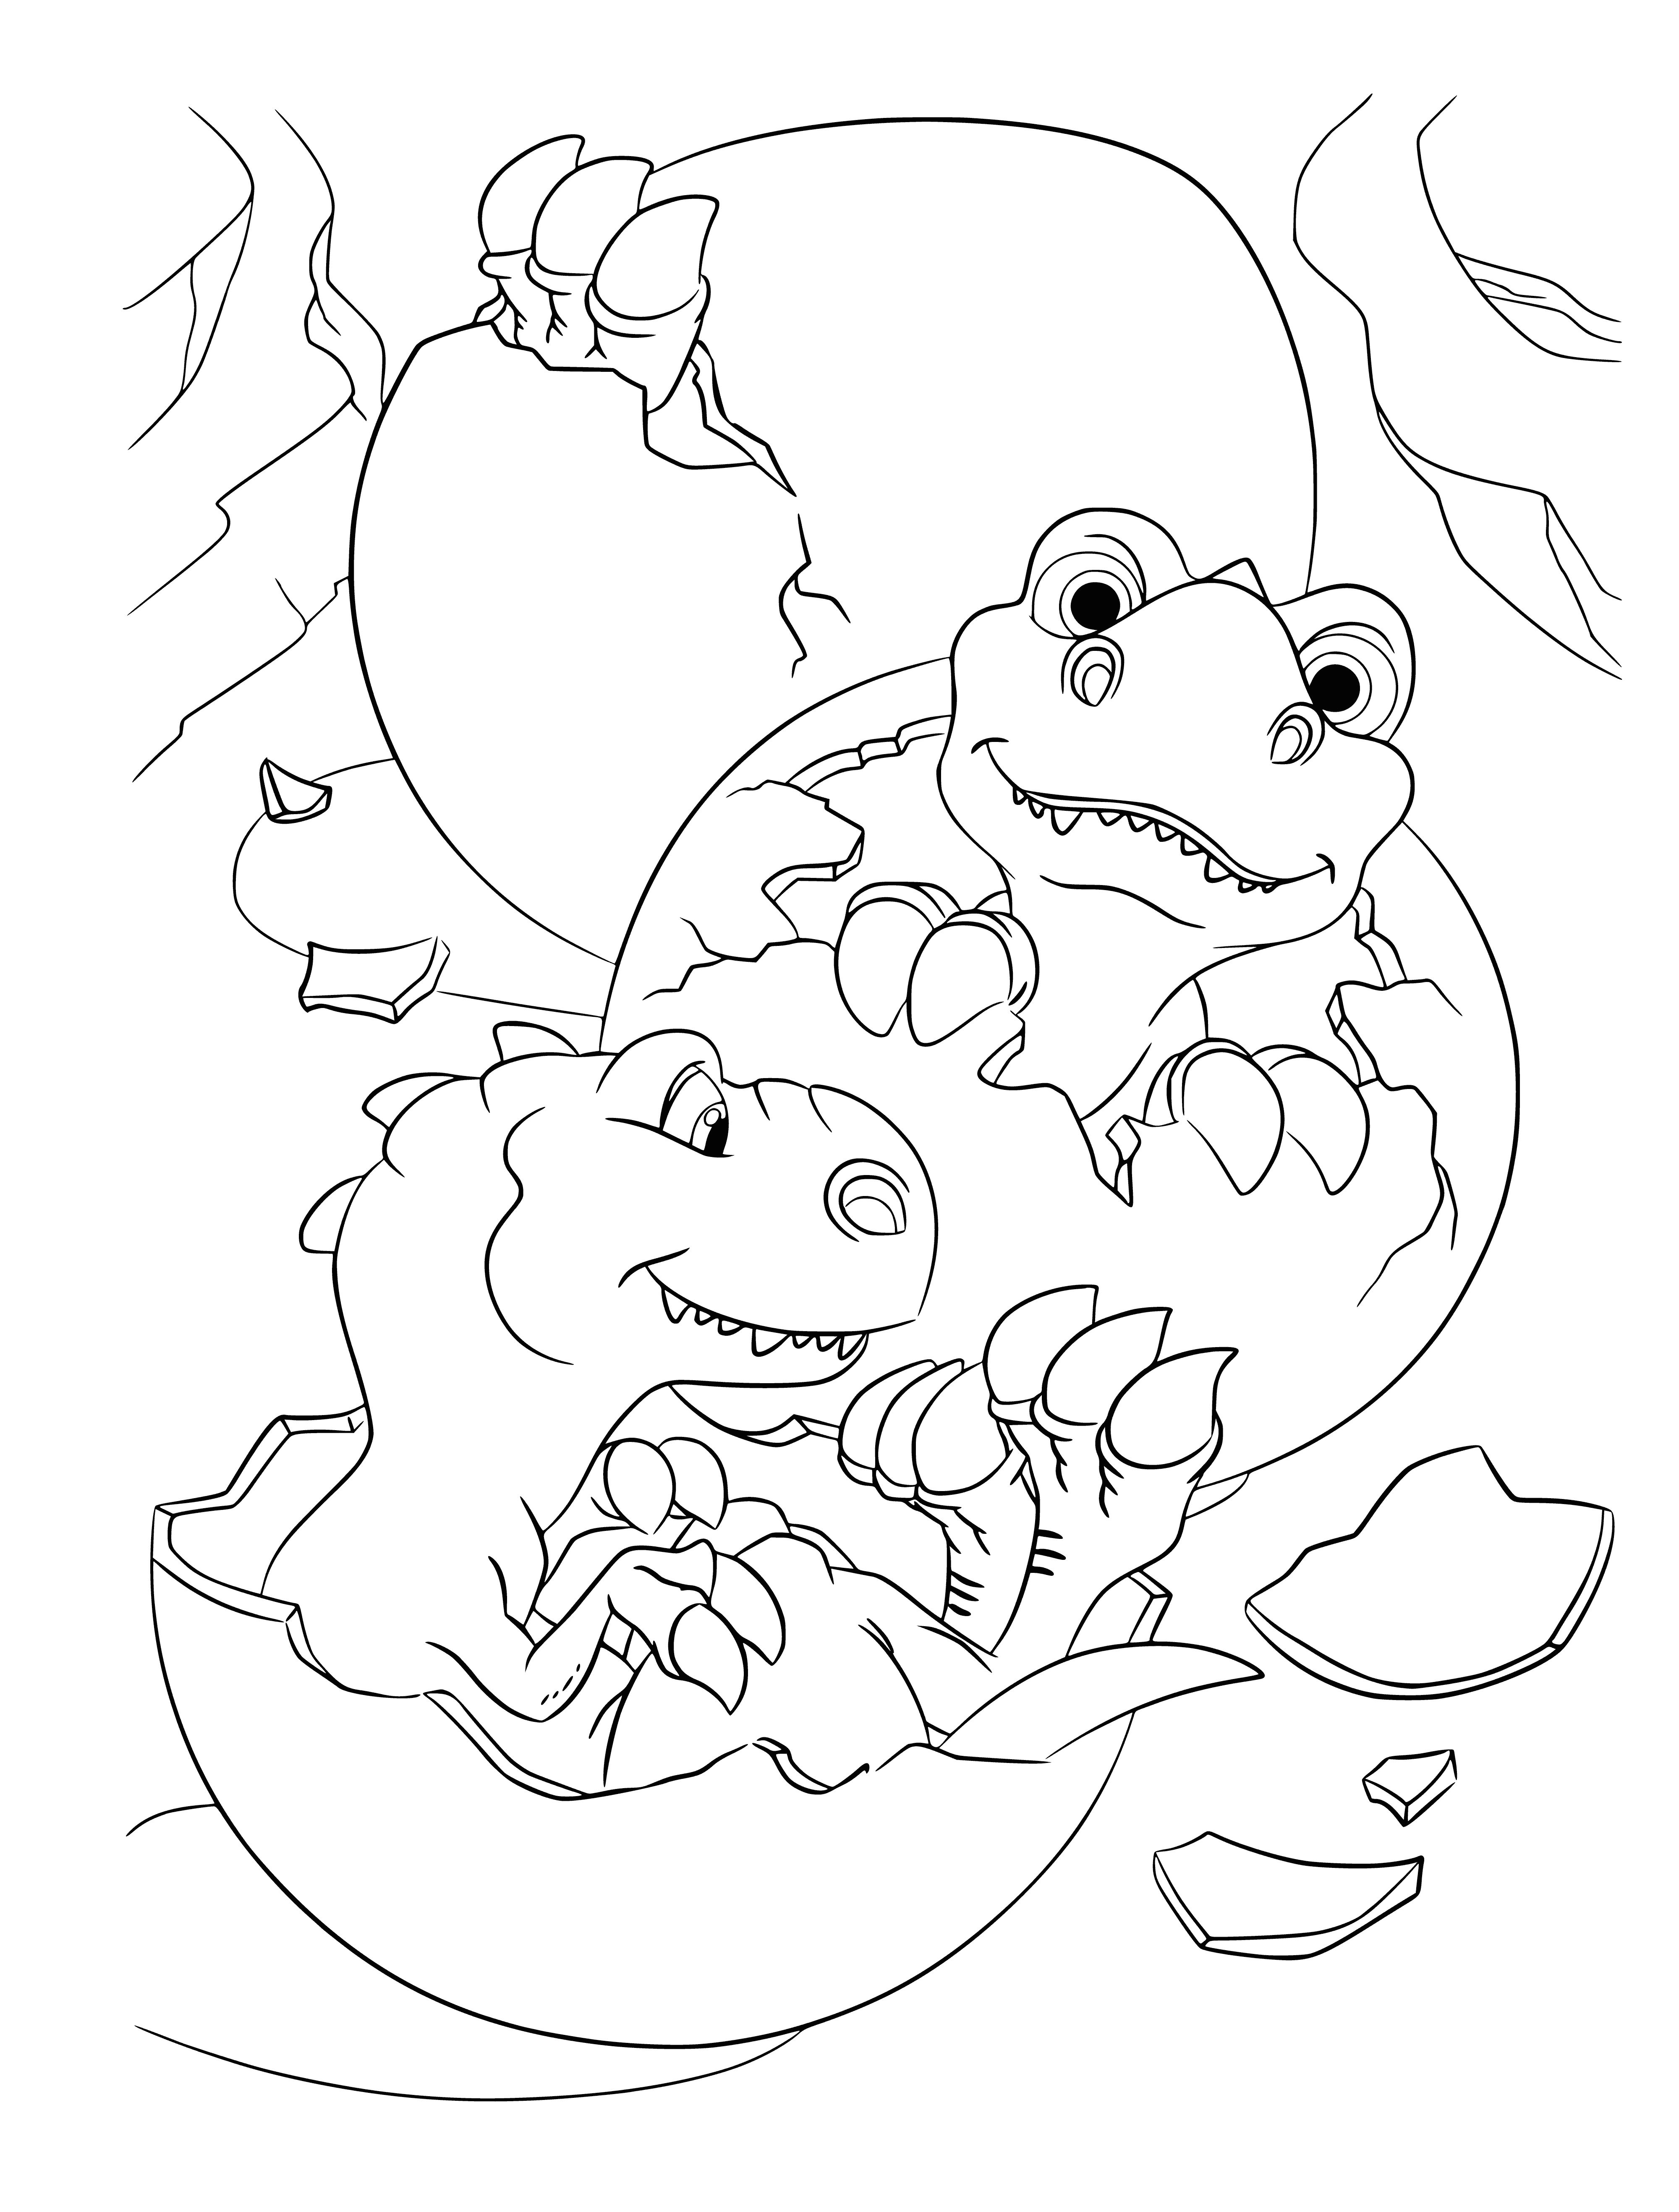 coloring page: Mother dinosaur protects newborns, small striped dinos running & playing. #dinosaurlove